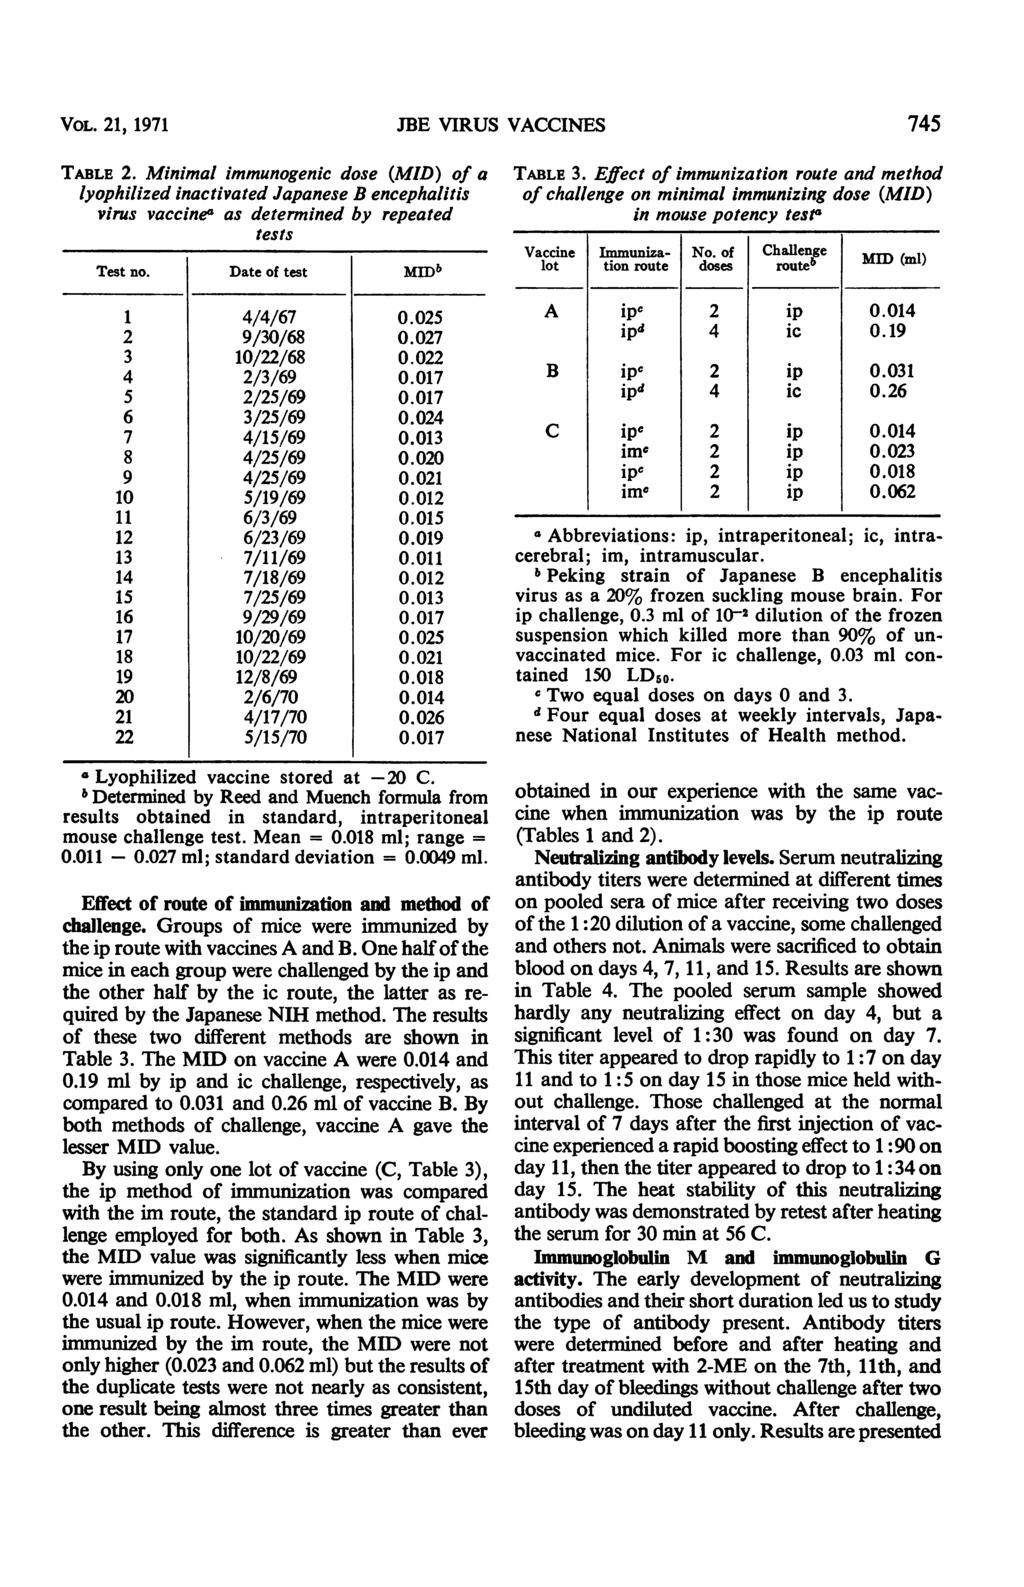 VOL. 21 1971 JBE VIRUS VACCINES 745 TABLE 2. Minimal immunogenic dose (MID) of a lyophilized inactivated Japanese B encephalitis virus vaccine, as determined by repeated tests Test no.